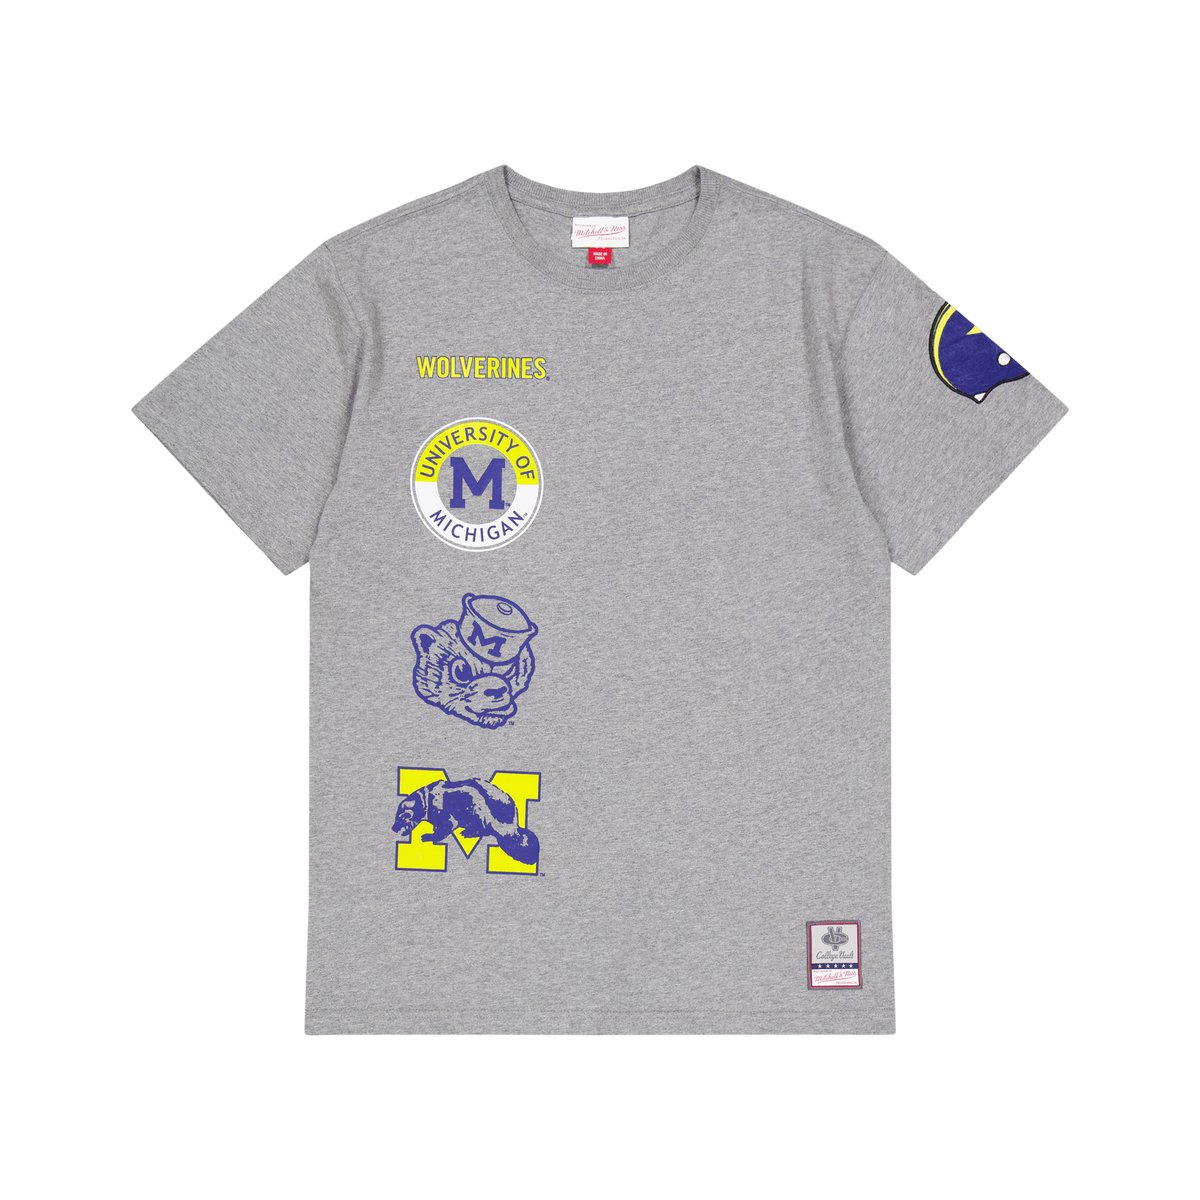 M&n City Collection S/s Tee Grey Heather